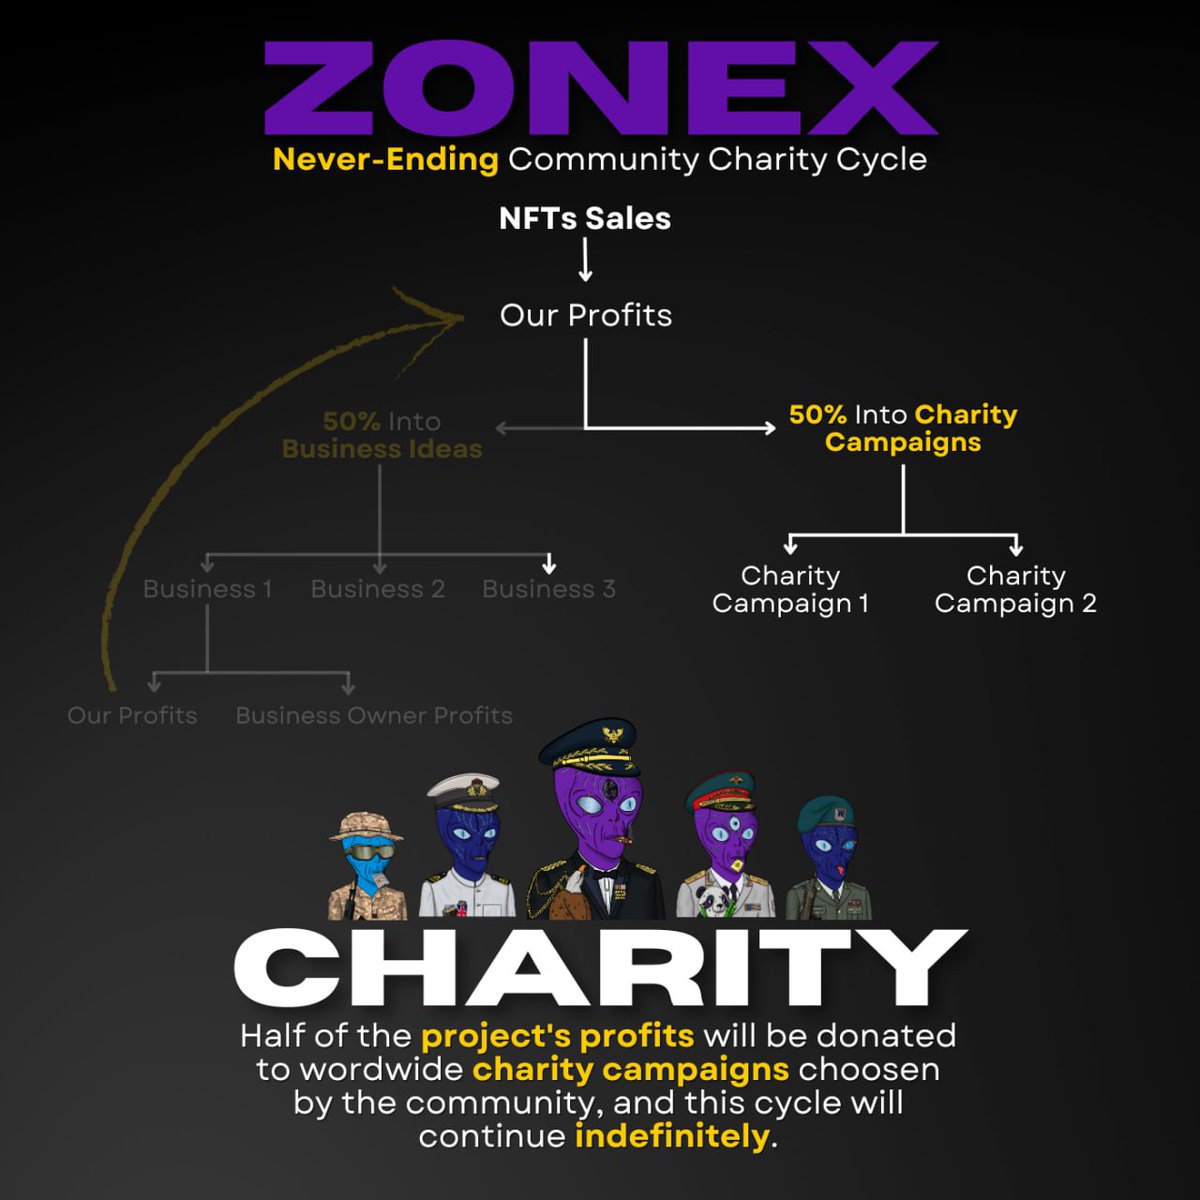 🚨 ZoneX Charity! 🚨 This initiative will donate 50% of our profits to various charities chosen by the community FOREVER. 👋 We believe that giving back to the world is the best approach and together, we can make a positive impact that will be remembered for years to come.